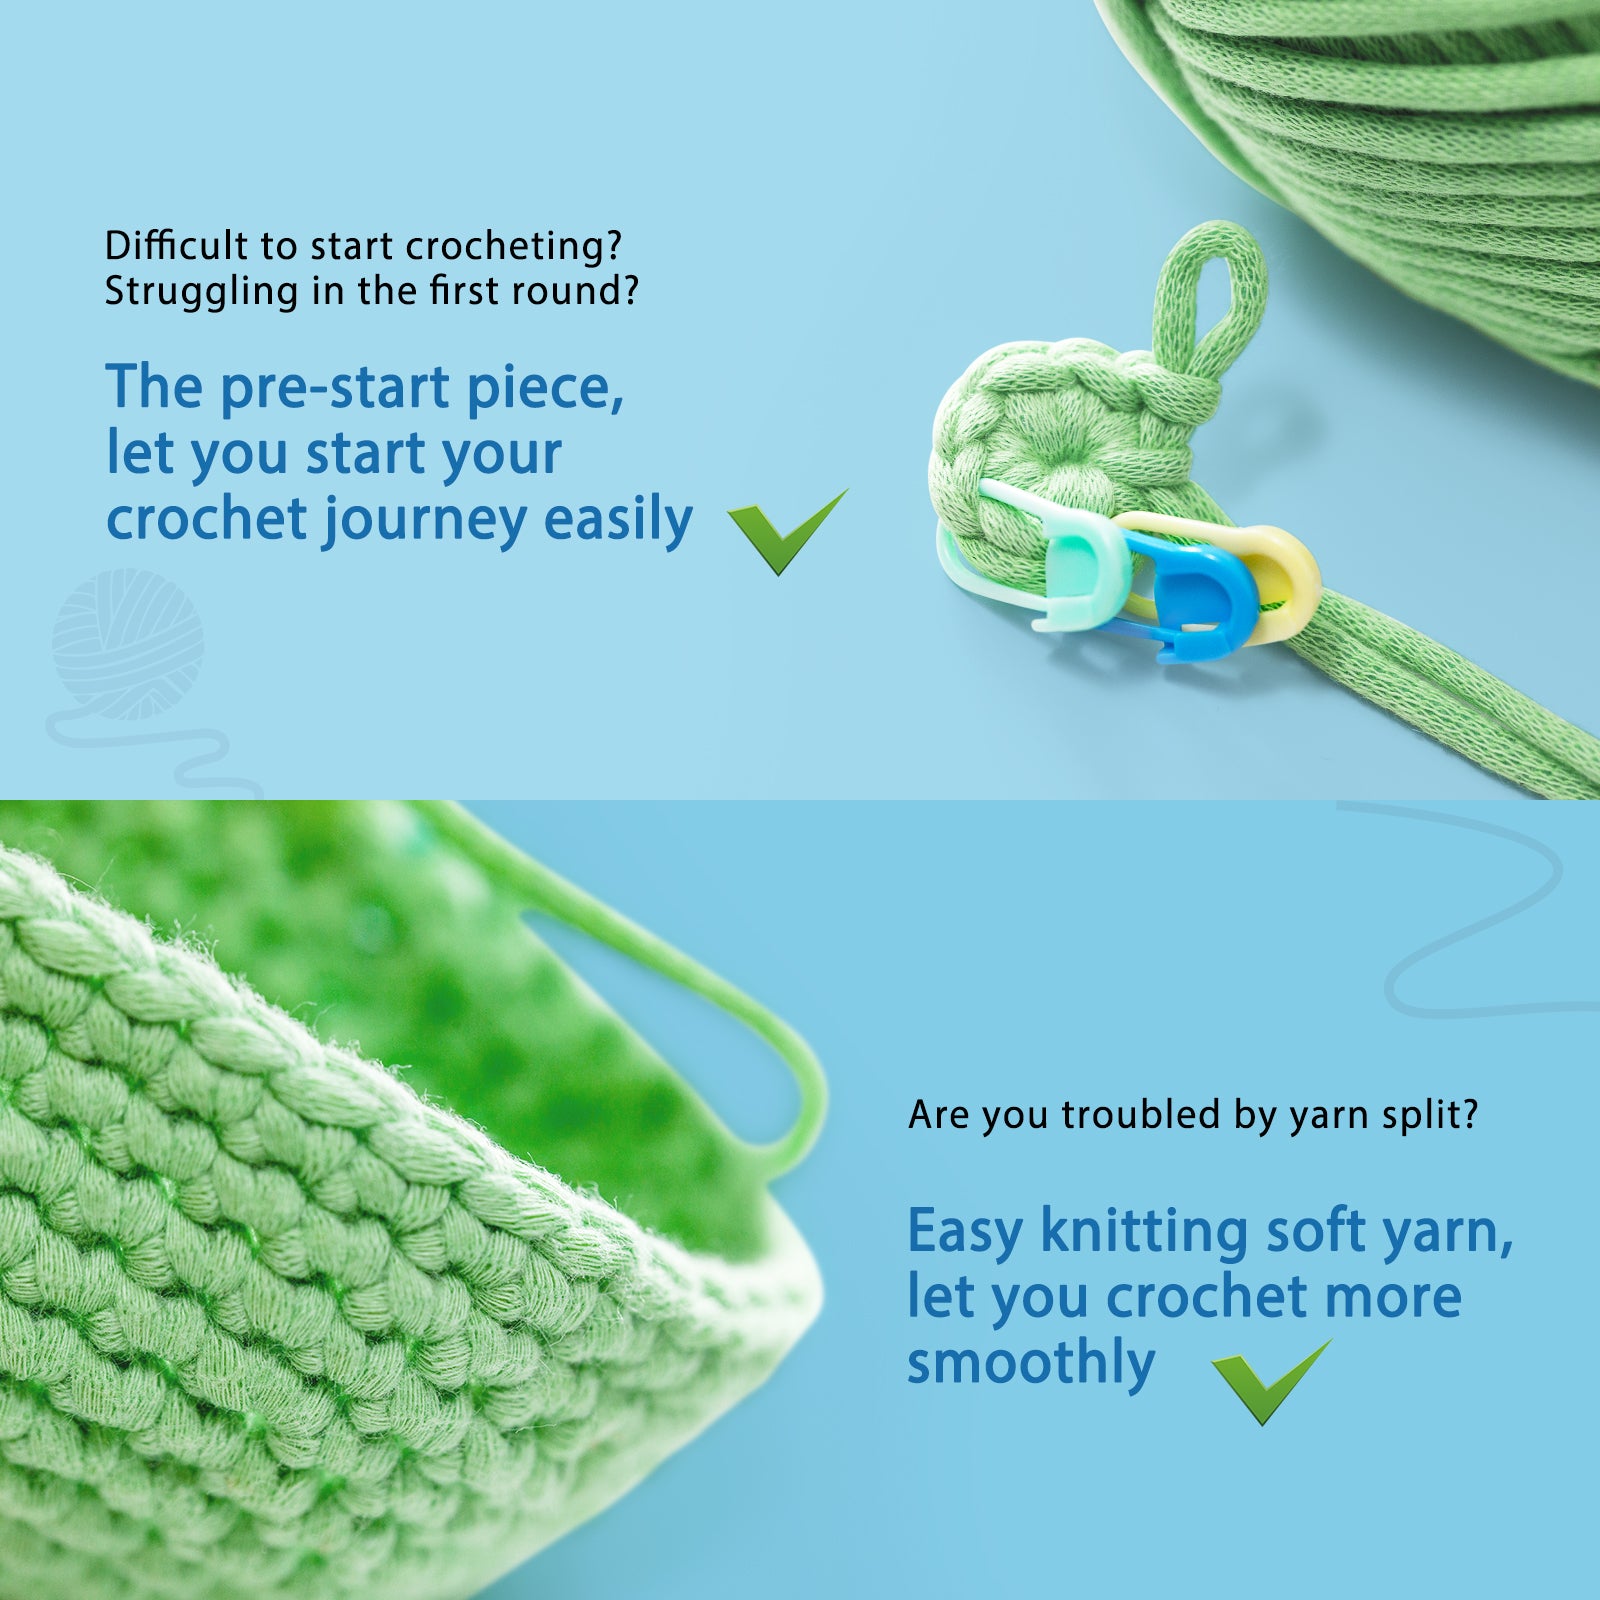 Complete Crochet Kit for Beginners: Starter Crochet Kit, Include Easy Crocheting Soft Yarn, Step-by-Step Video Tutorial, Accessories, Mystery Alien Style, Birthday, Holiday Gift for Adults, Teens